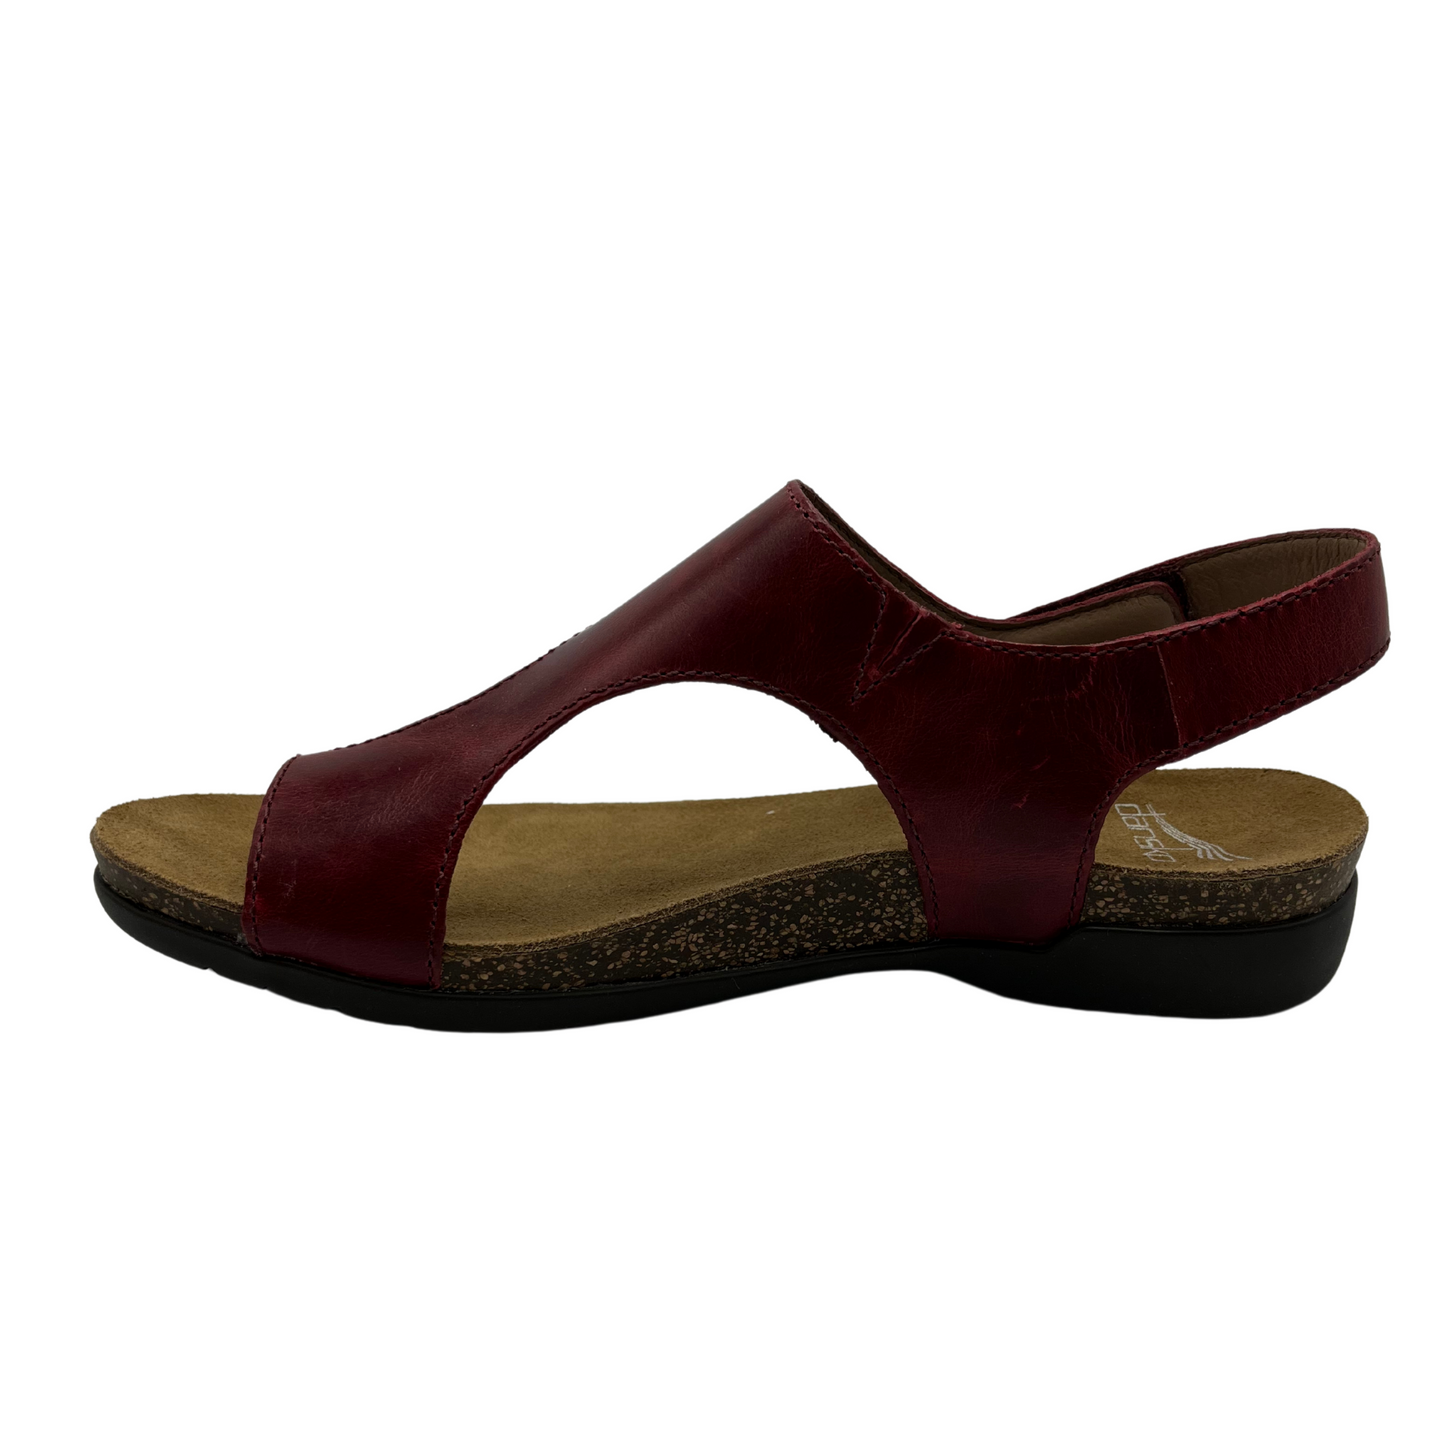 Left facing view of dark red leather sandal with velcro ankle strap and thin toe strap